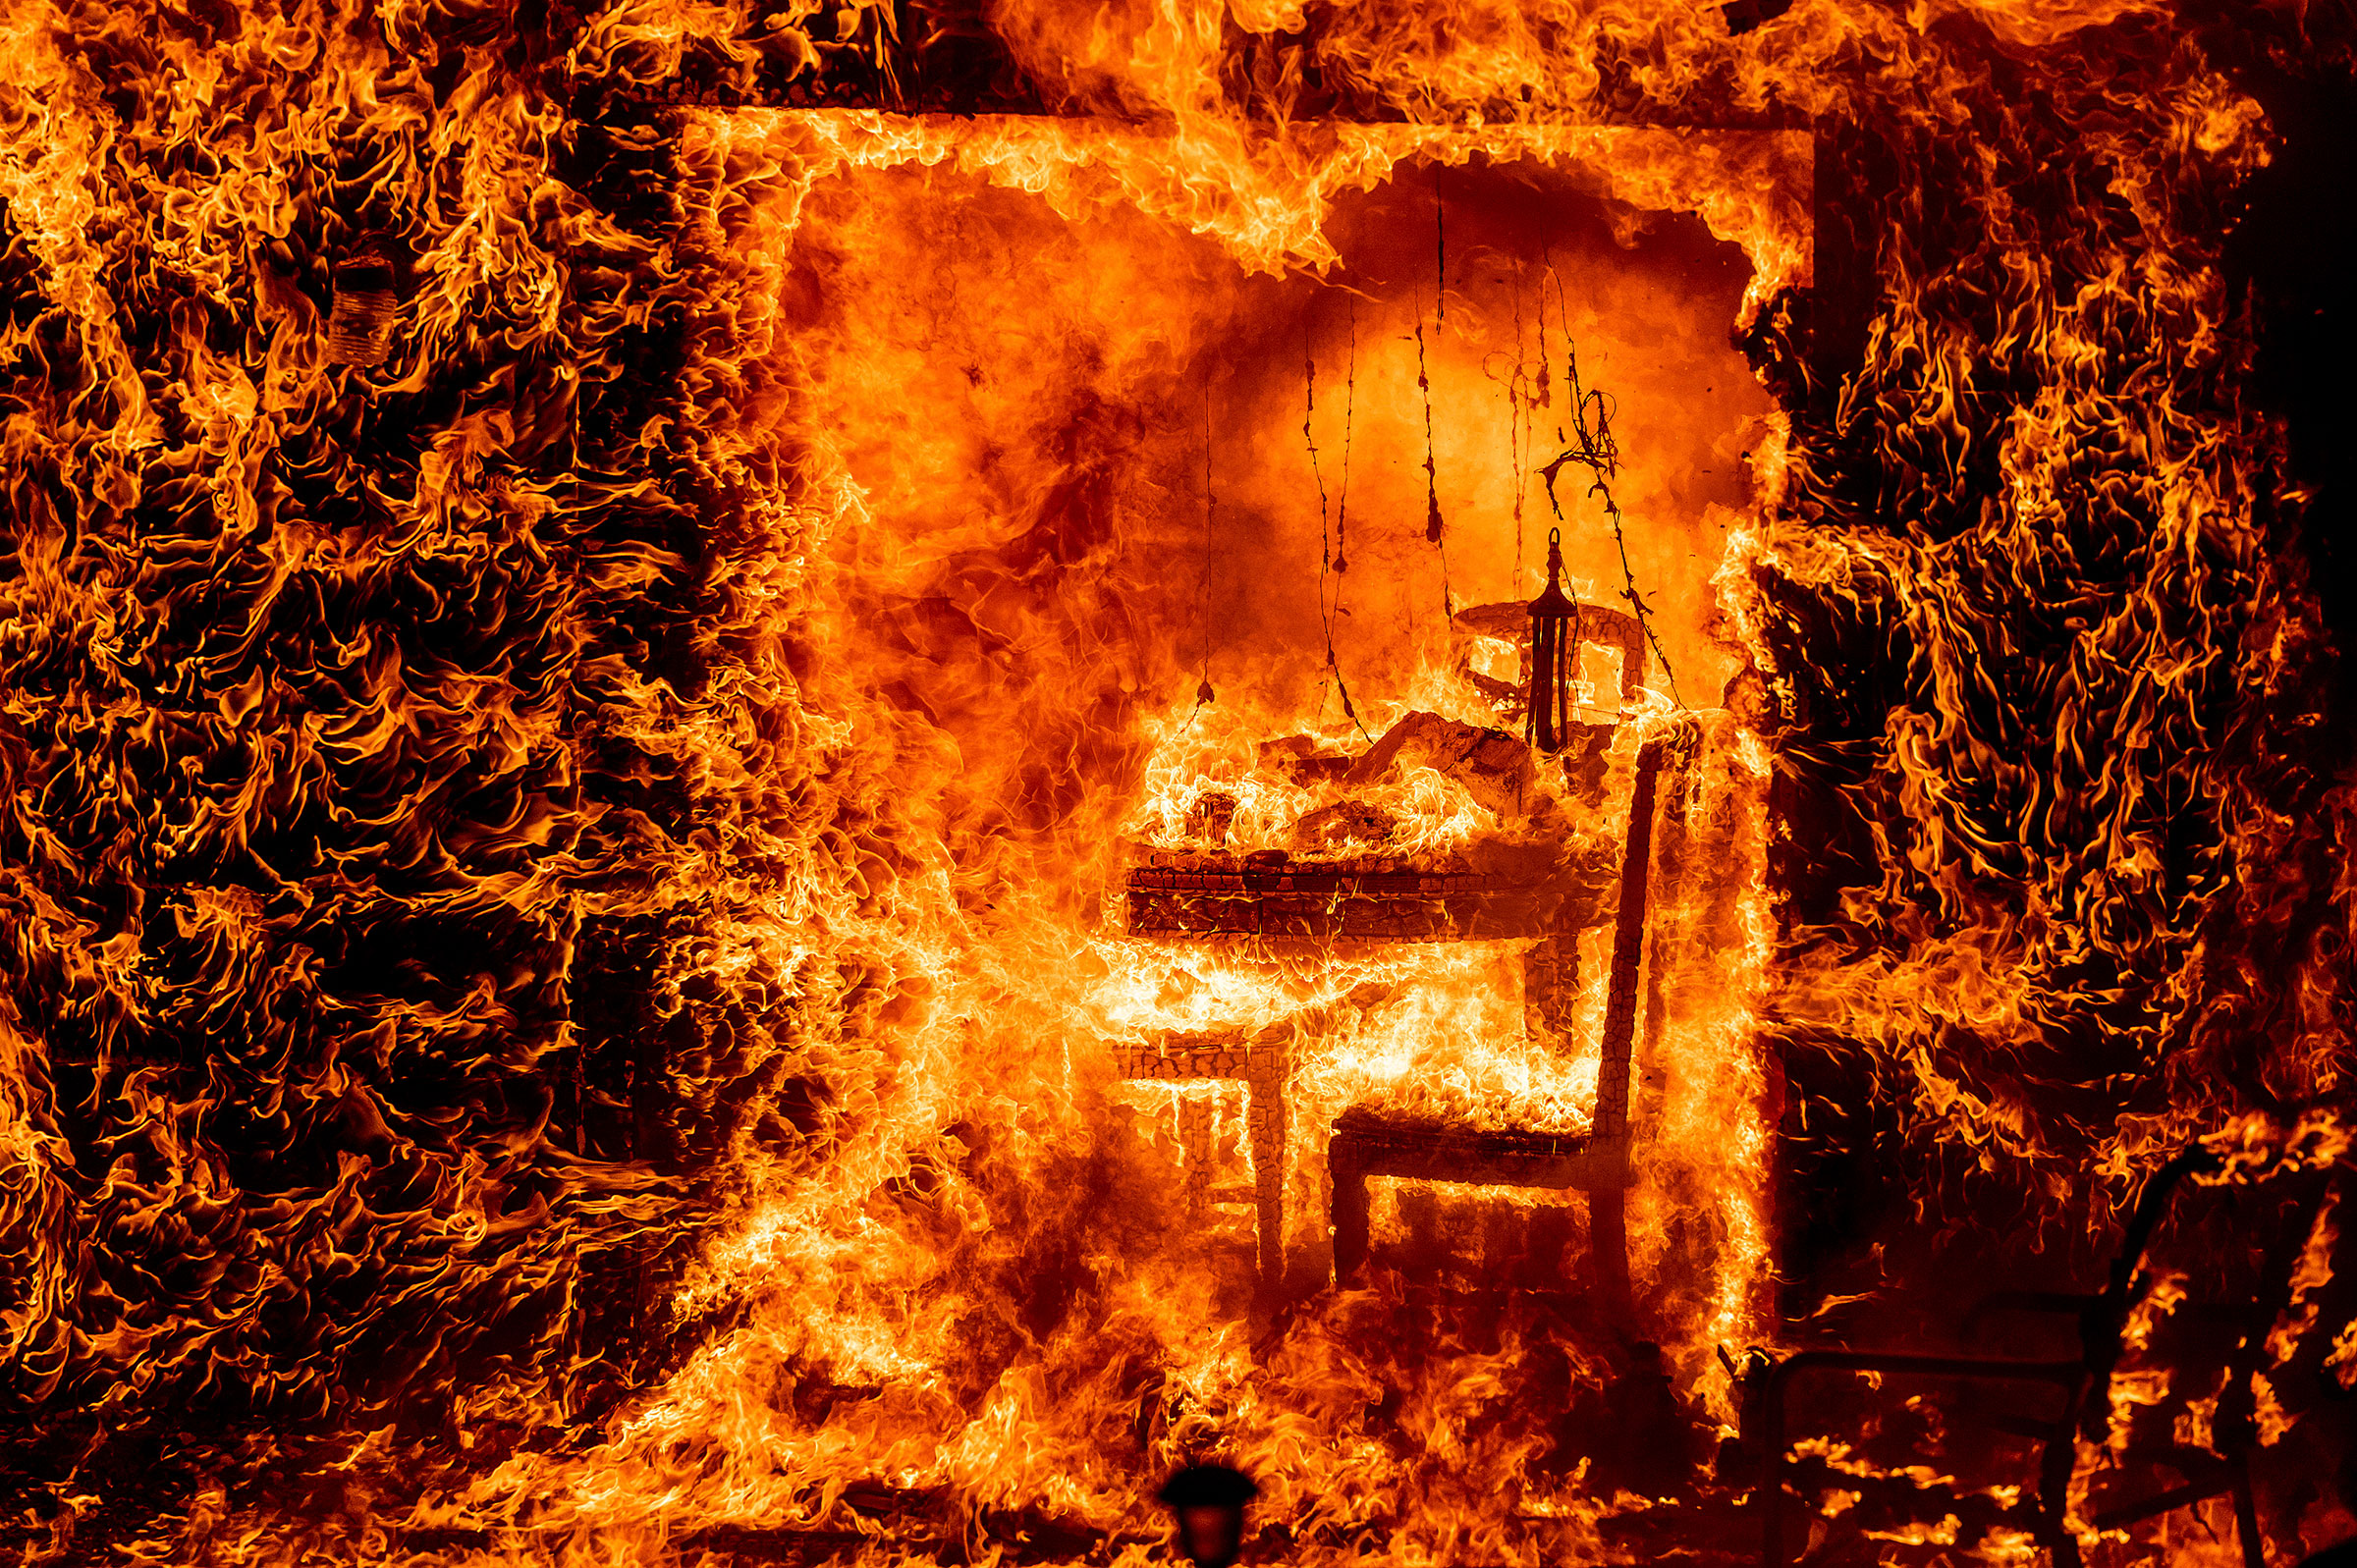 Flames engulf a chair inside a burning home as the Oak Fire burns in Mariposa County, Calif., on July 23. (Noah Berger—AP)